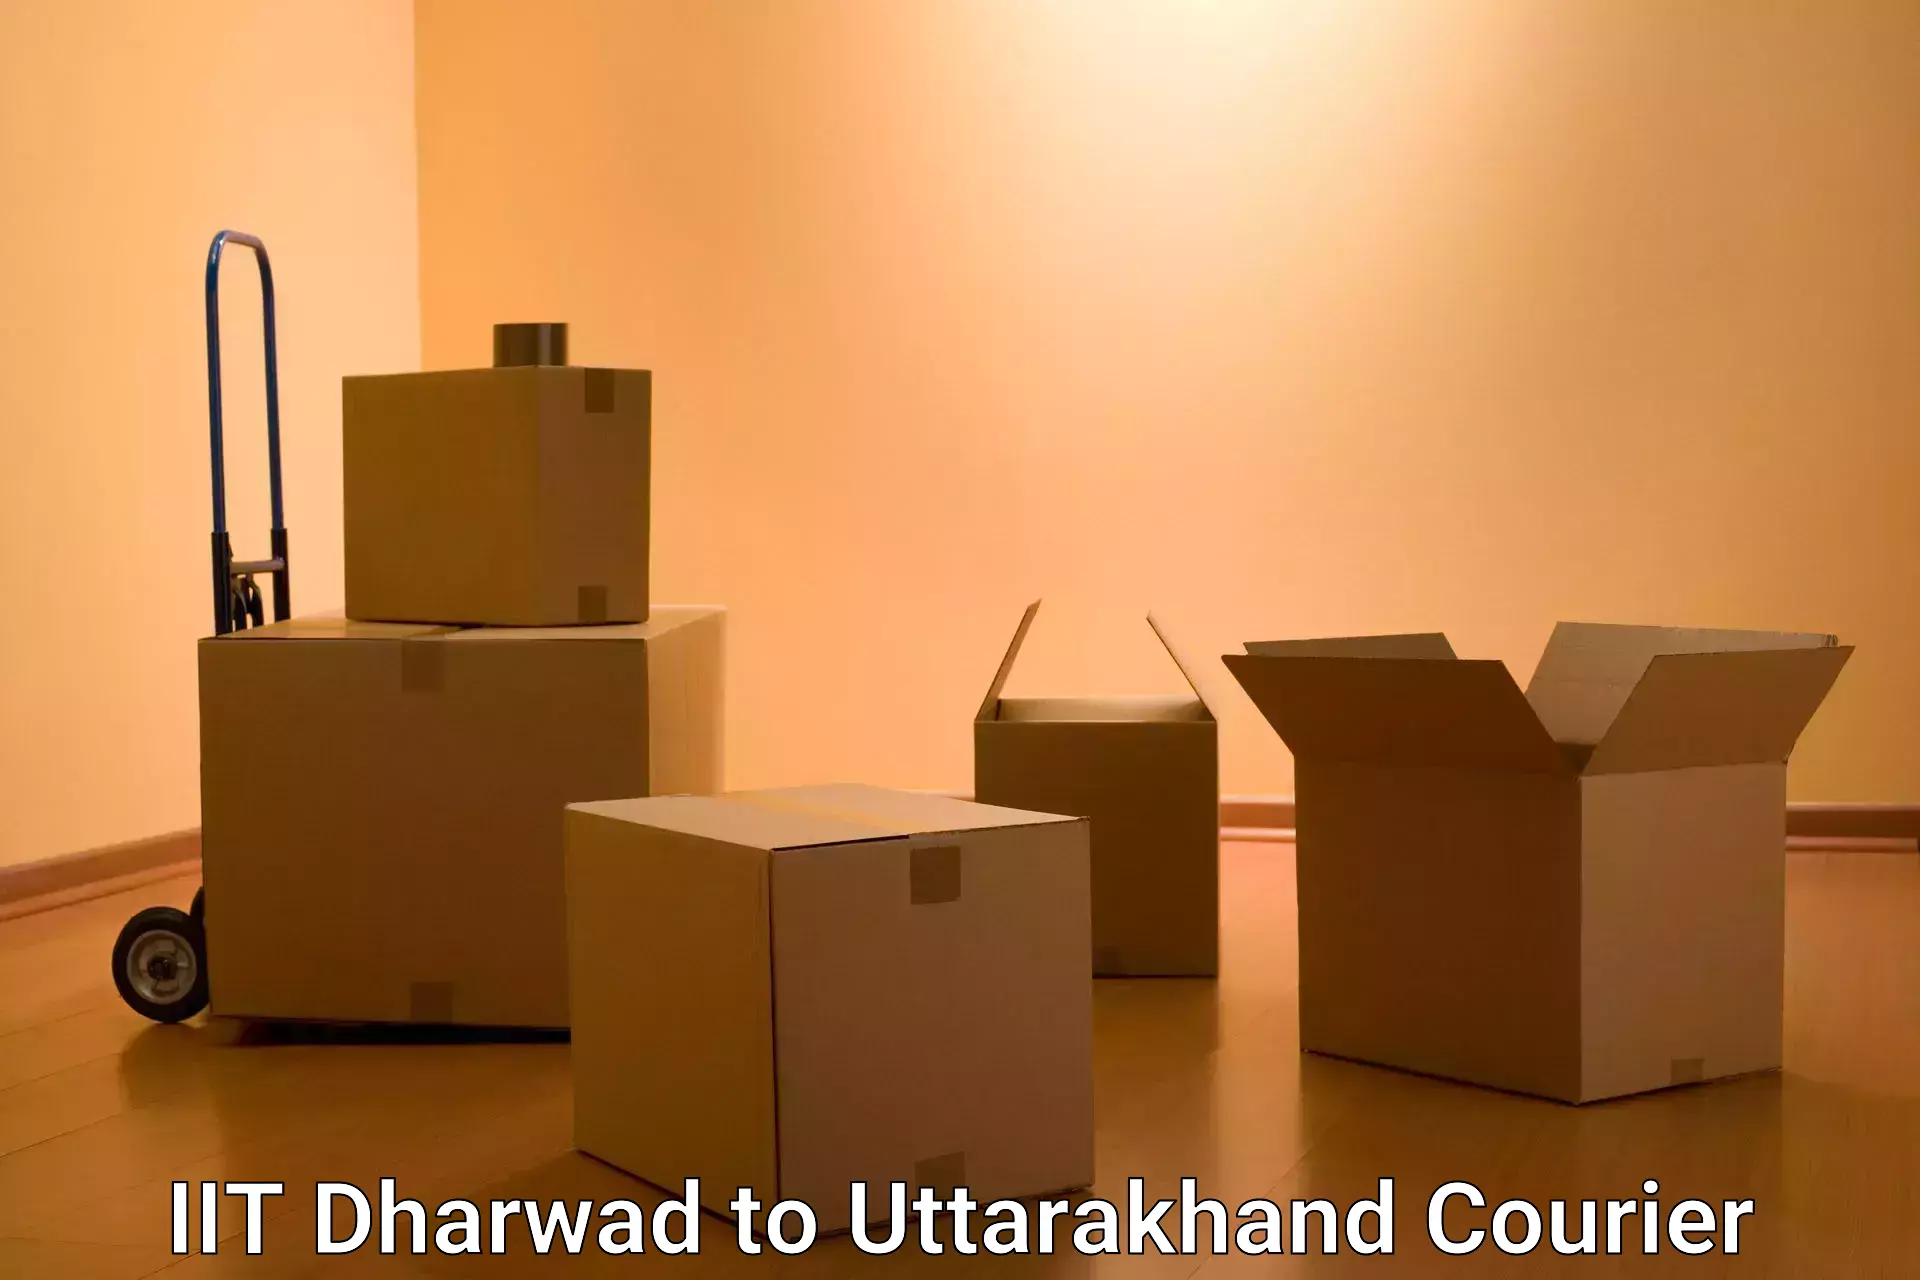 Multi-service courier options IIT Dharwad to Almora